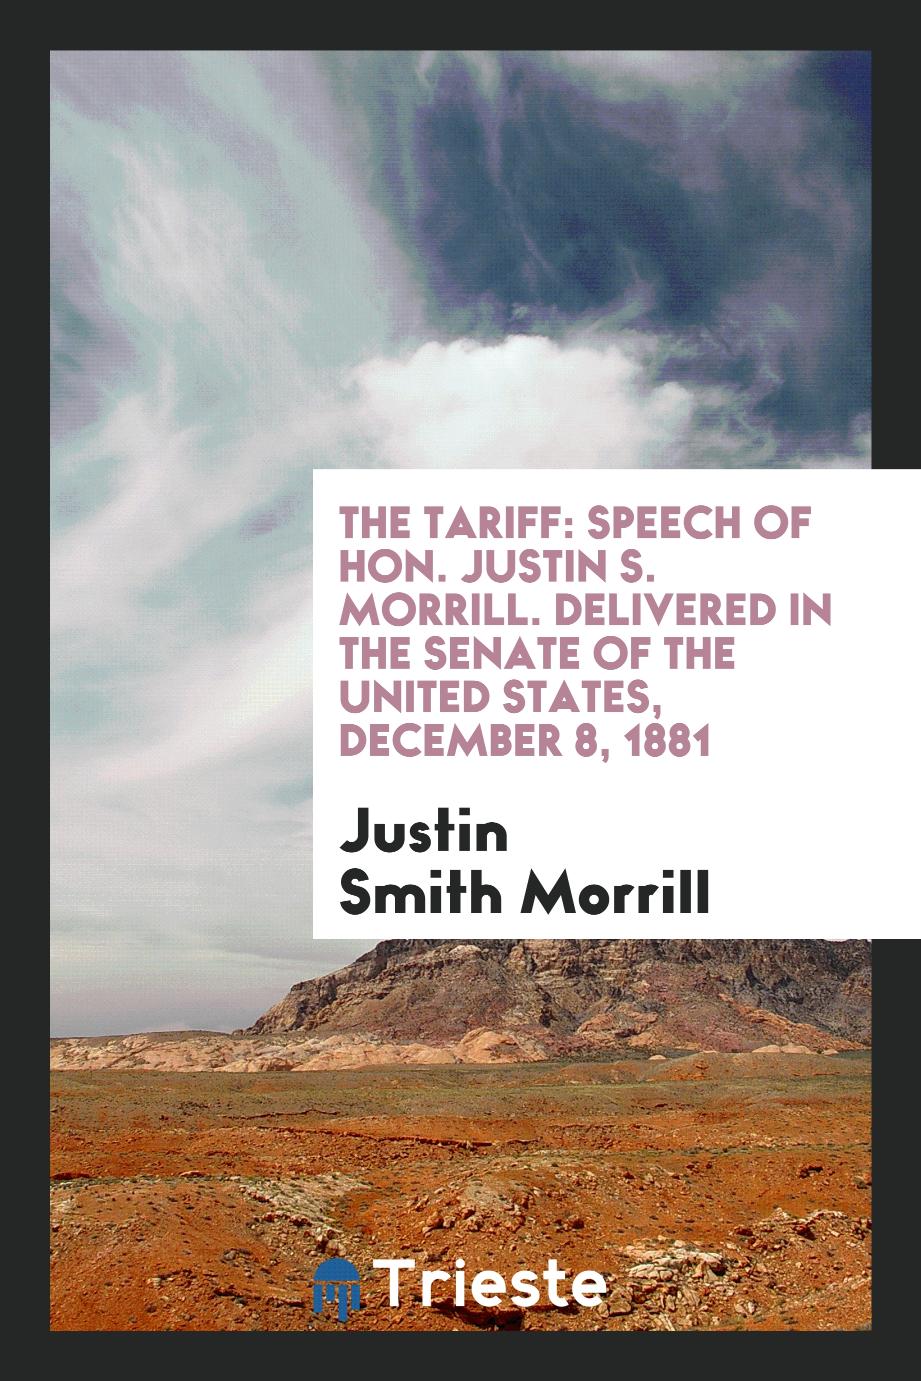 The Tariff: Speech of Hon. Justin S. Morrill. Delivered in the senate of the United states, December 8, 1881